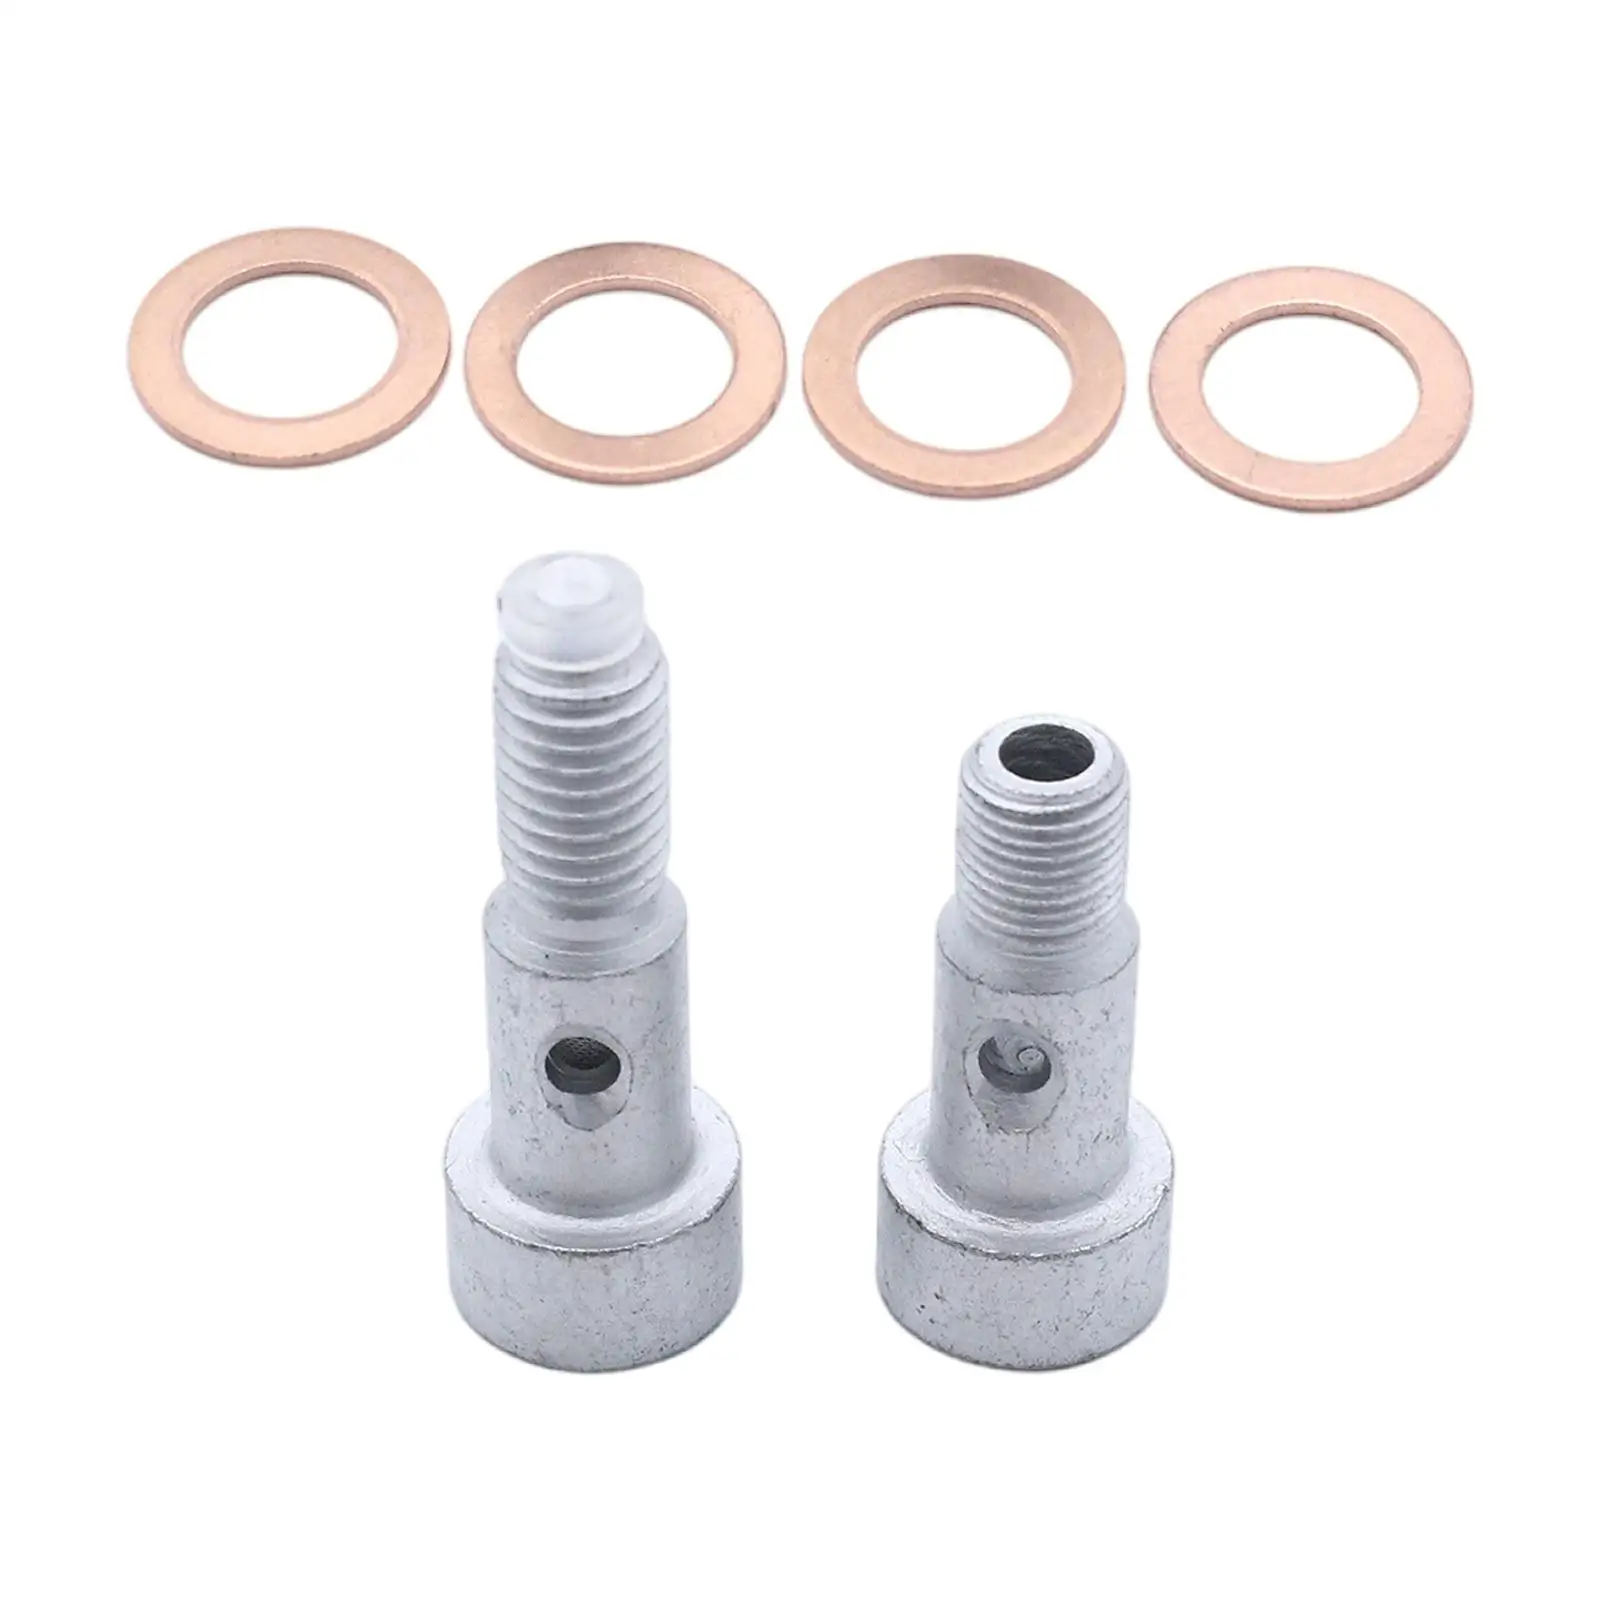 Turbo Fitting Washers Bolts Kit fits for Citroen 1.6 , Accessories